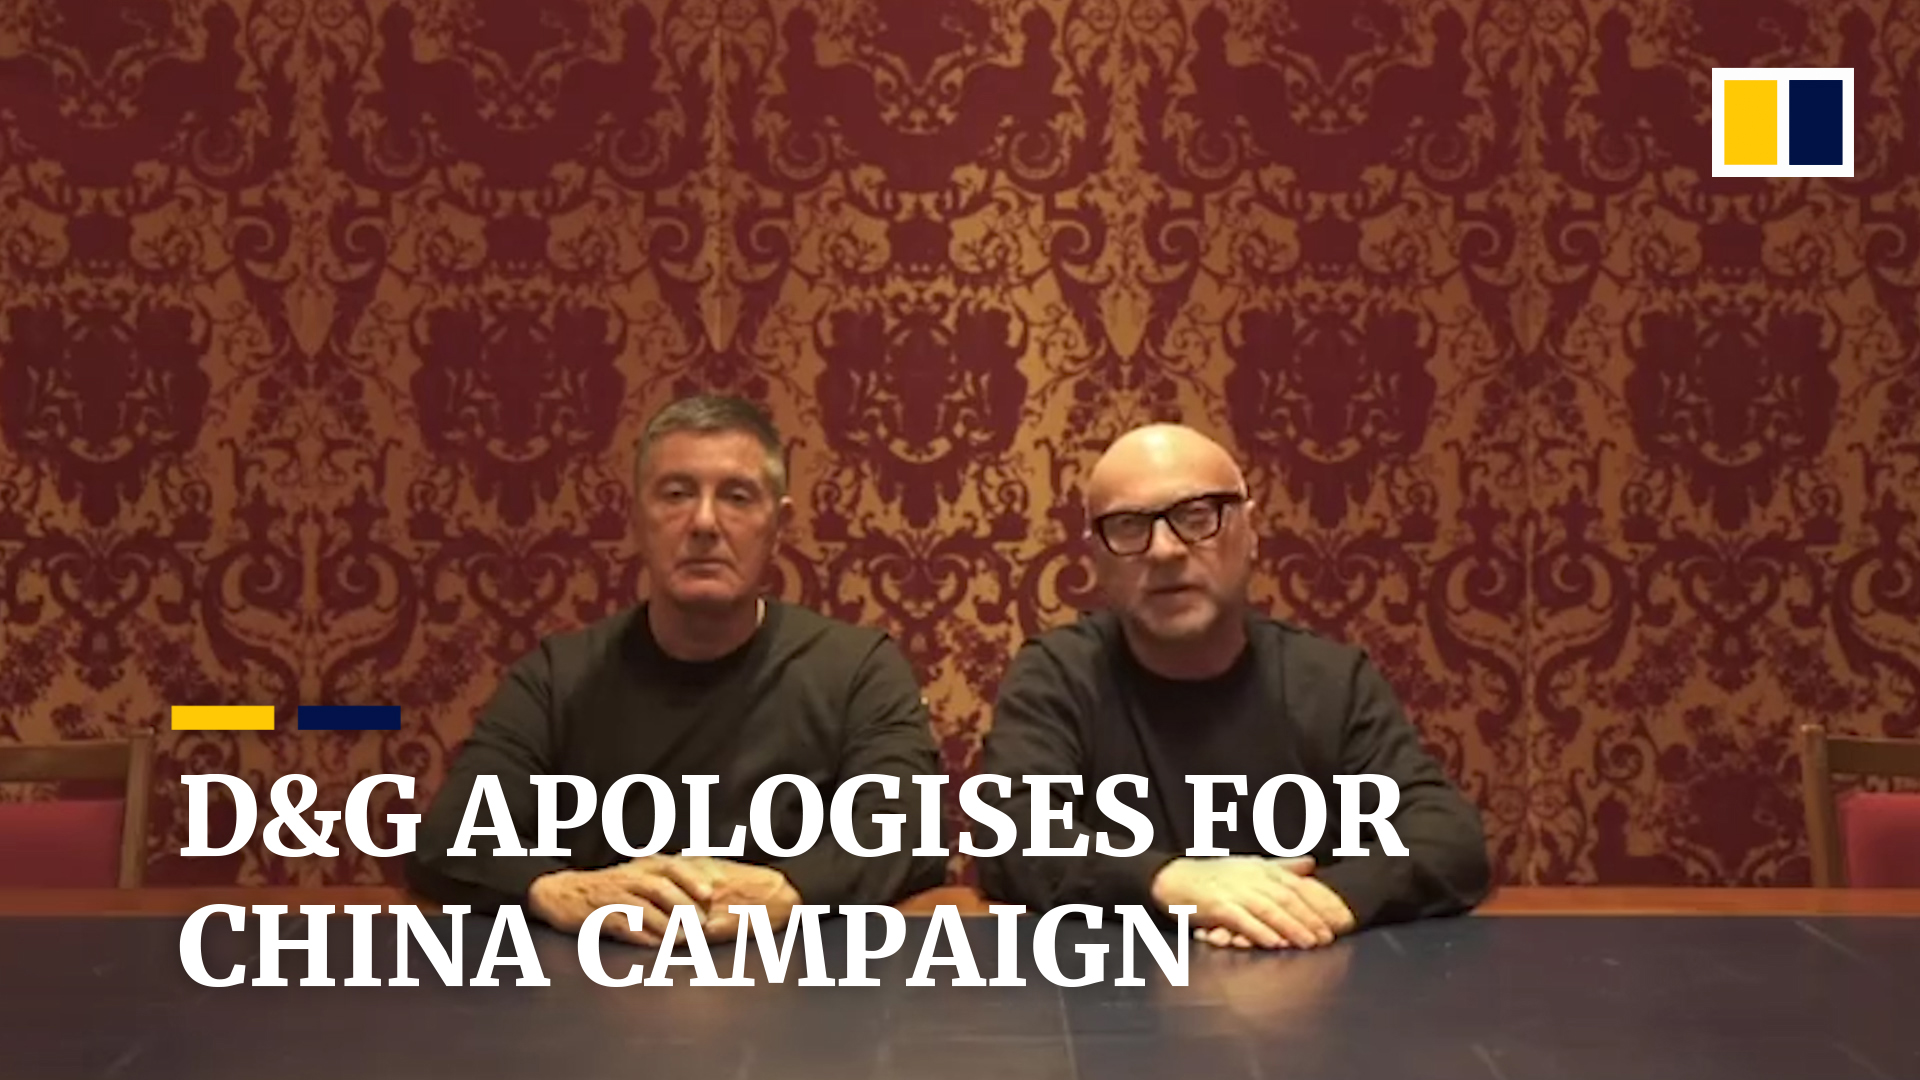 Dolce & Gabbana advert completely ruined my career, says Chinese model Zuo as breaks her silence over race row | South China Morning Post